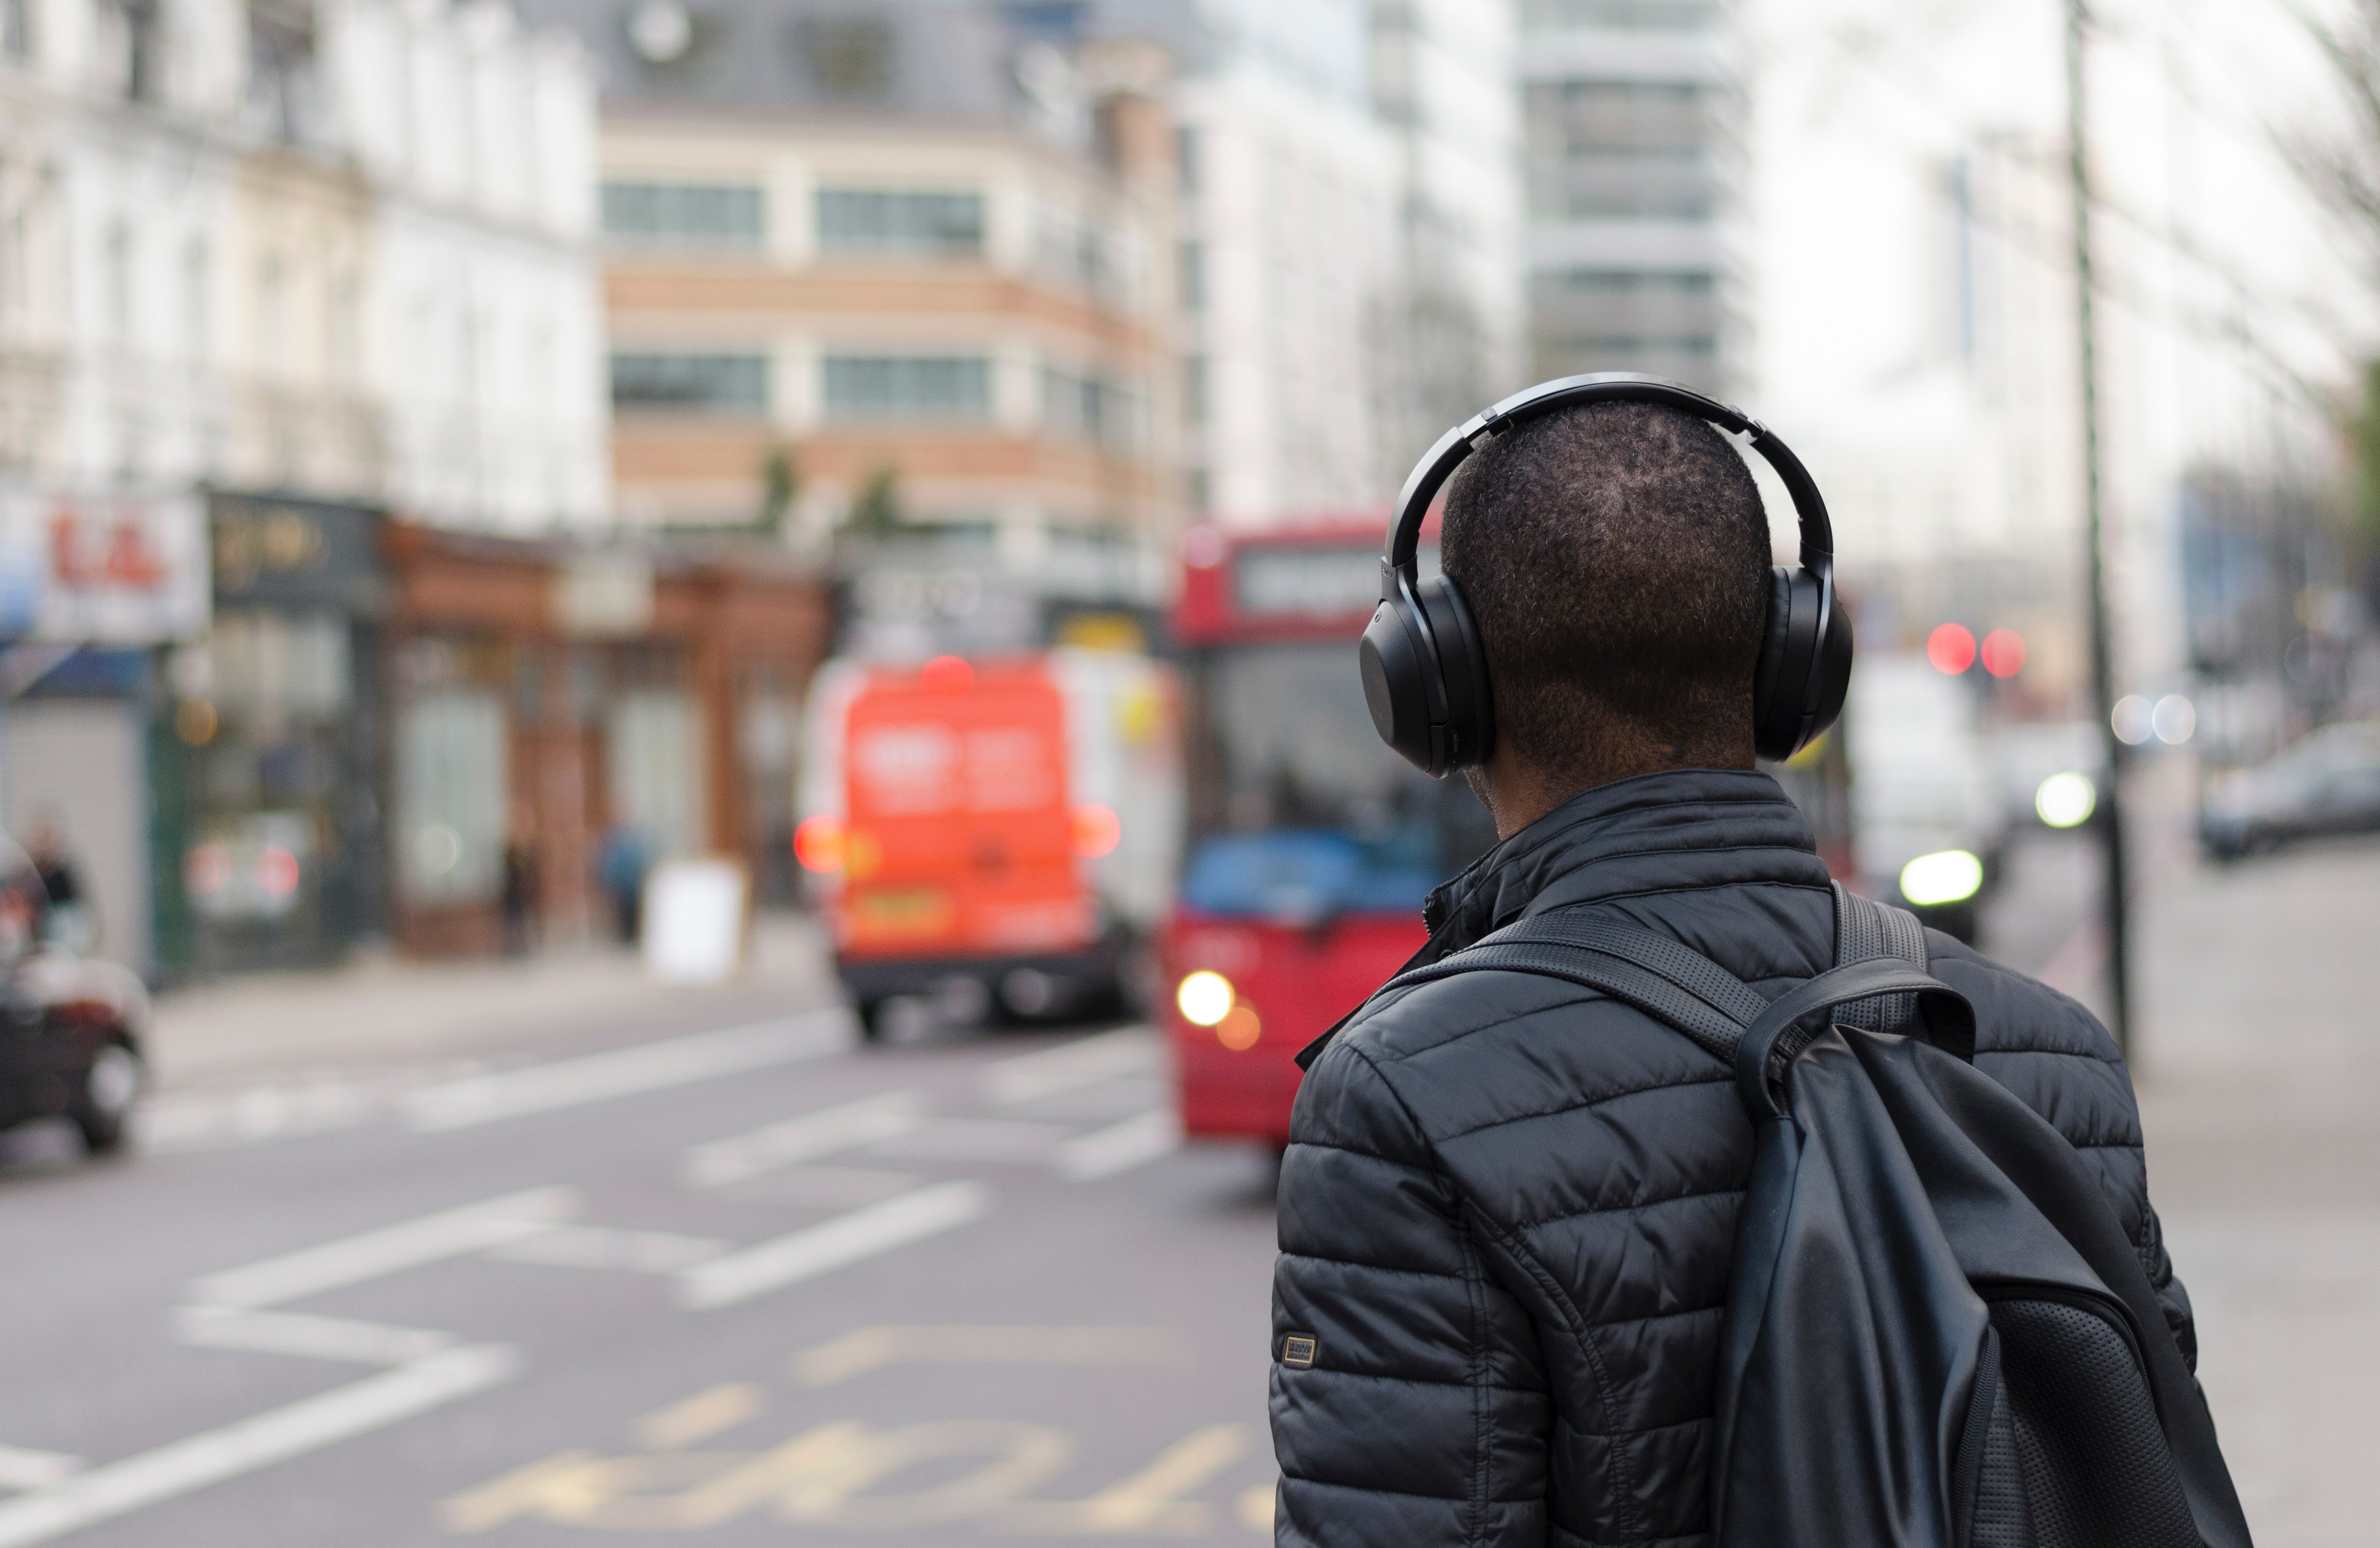 Top Travel Podcasts To Listen To